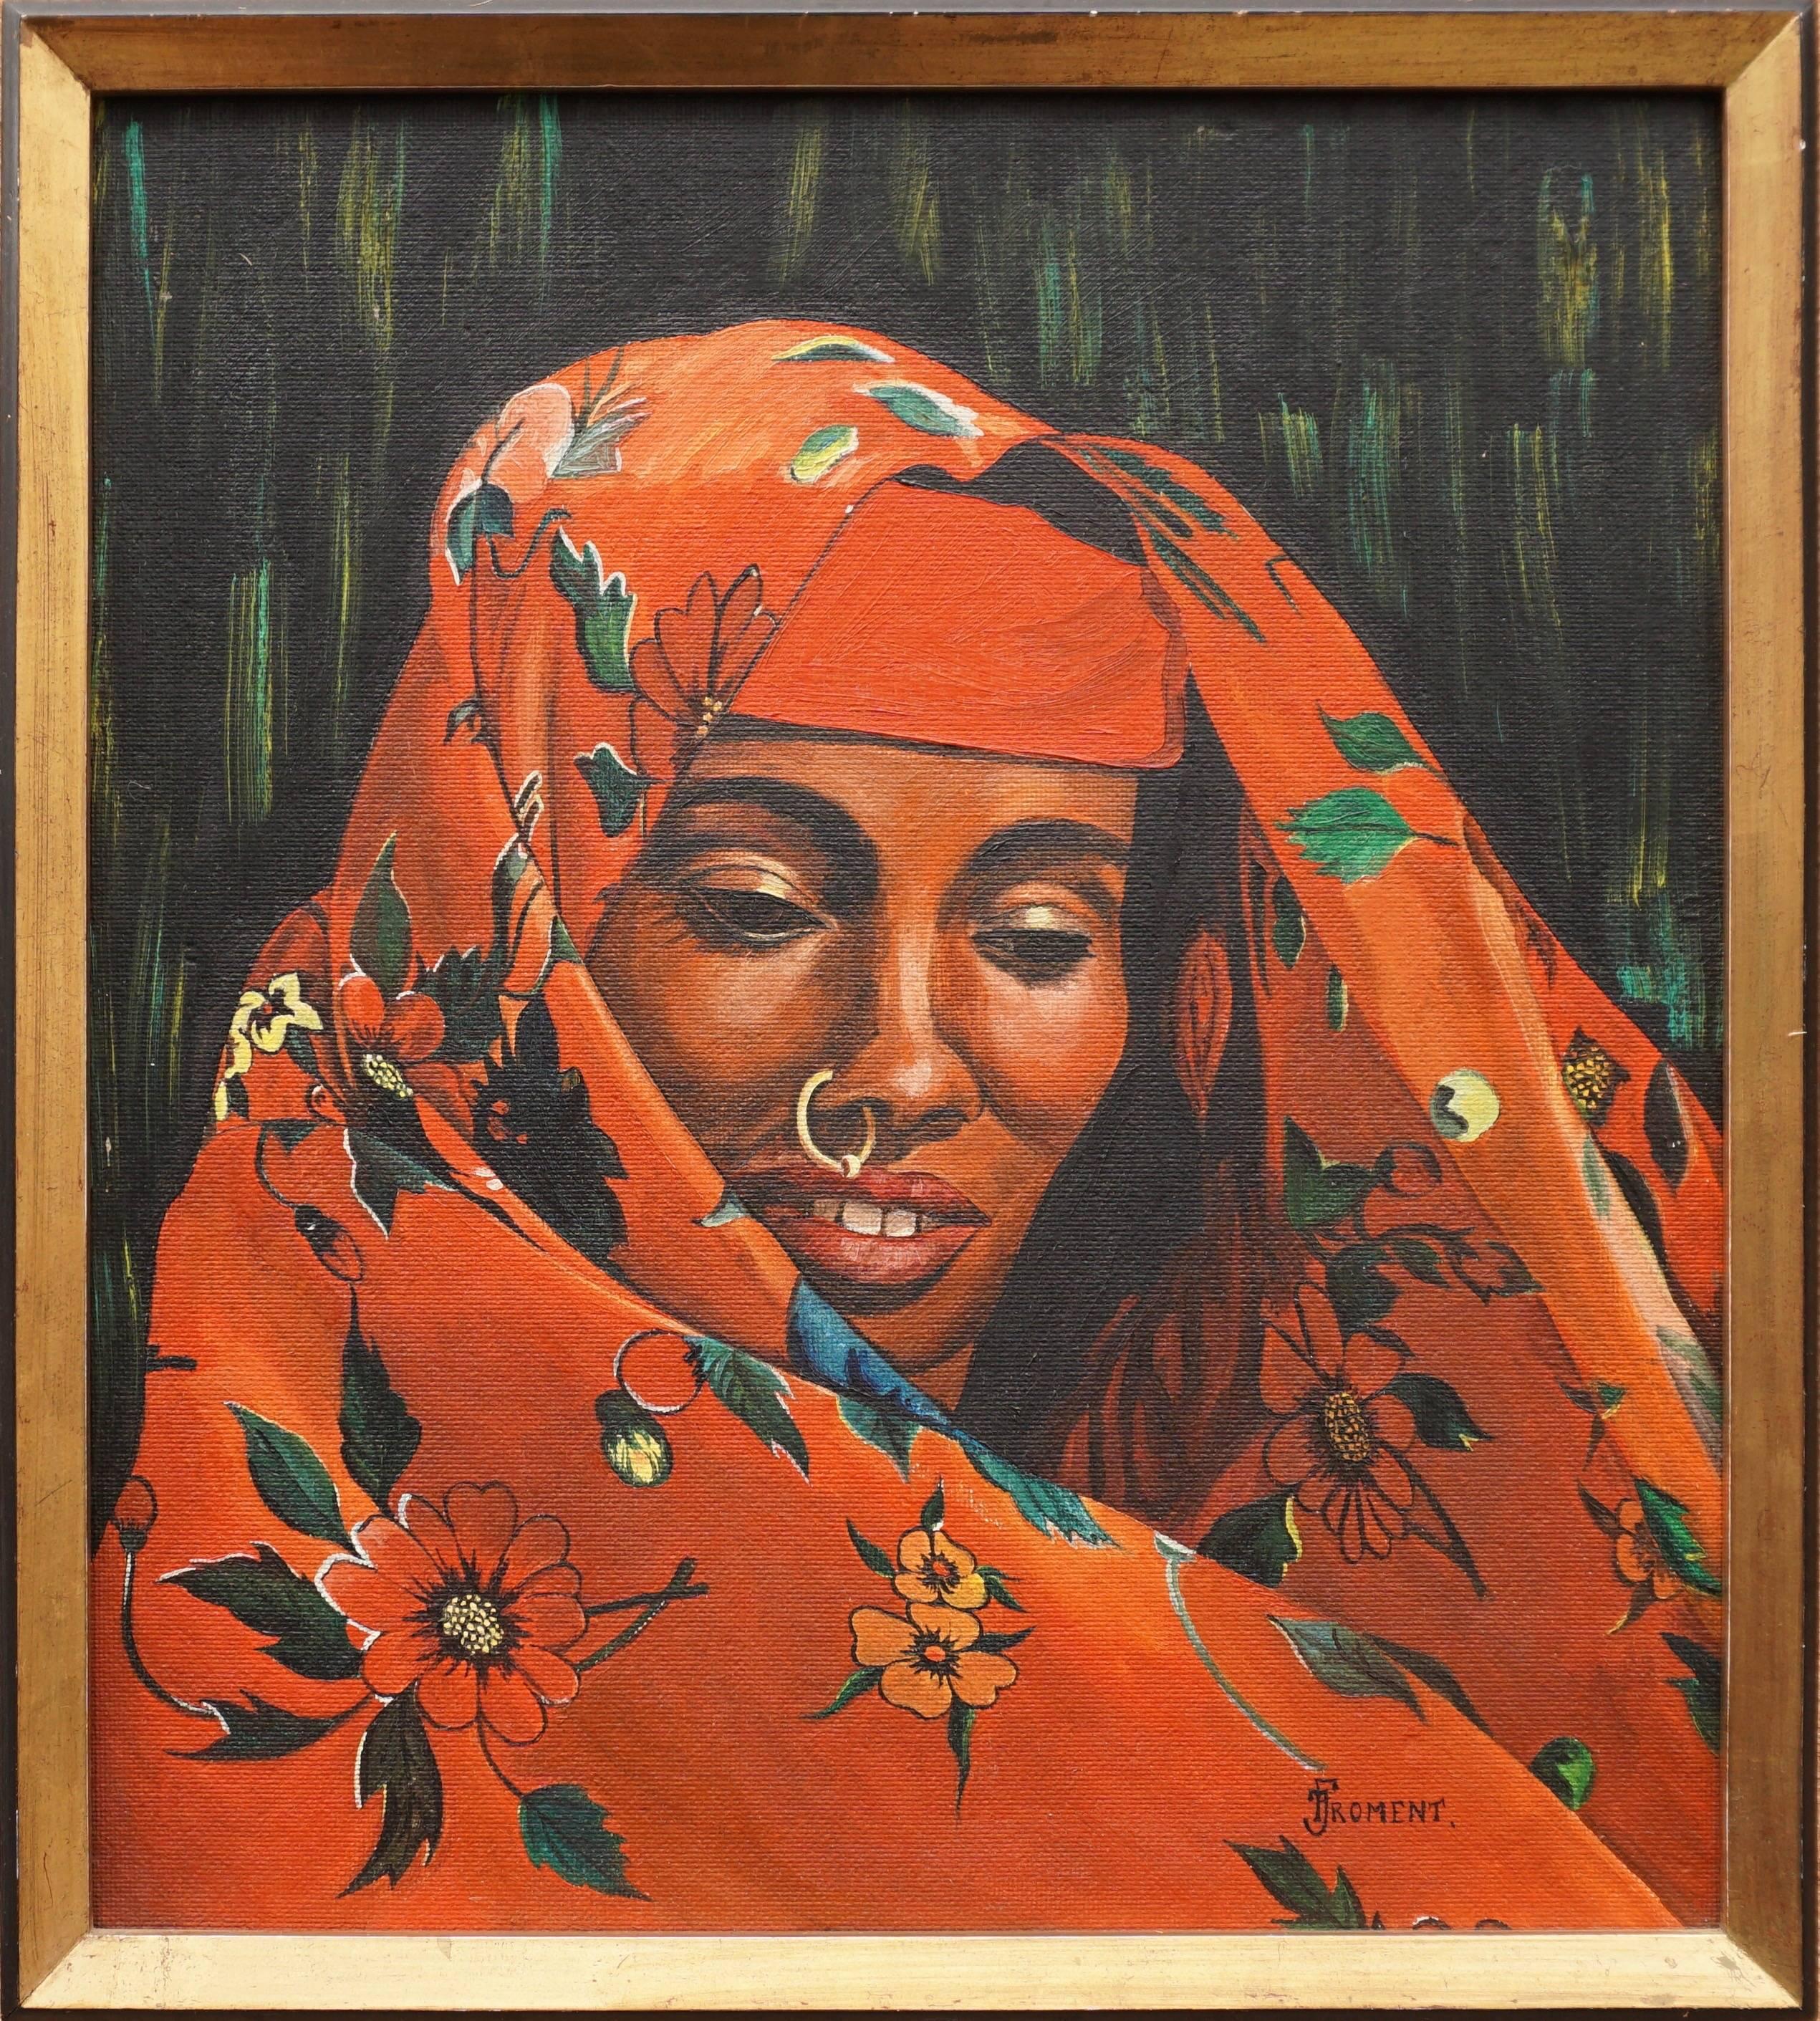 Orientalistic painting of a woman by J Froment.
Measures: Height 64 cm.
Width 59 cm.